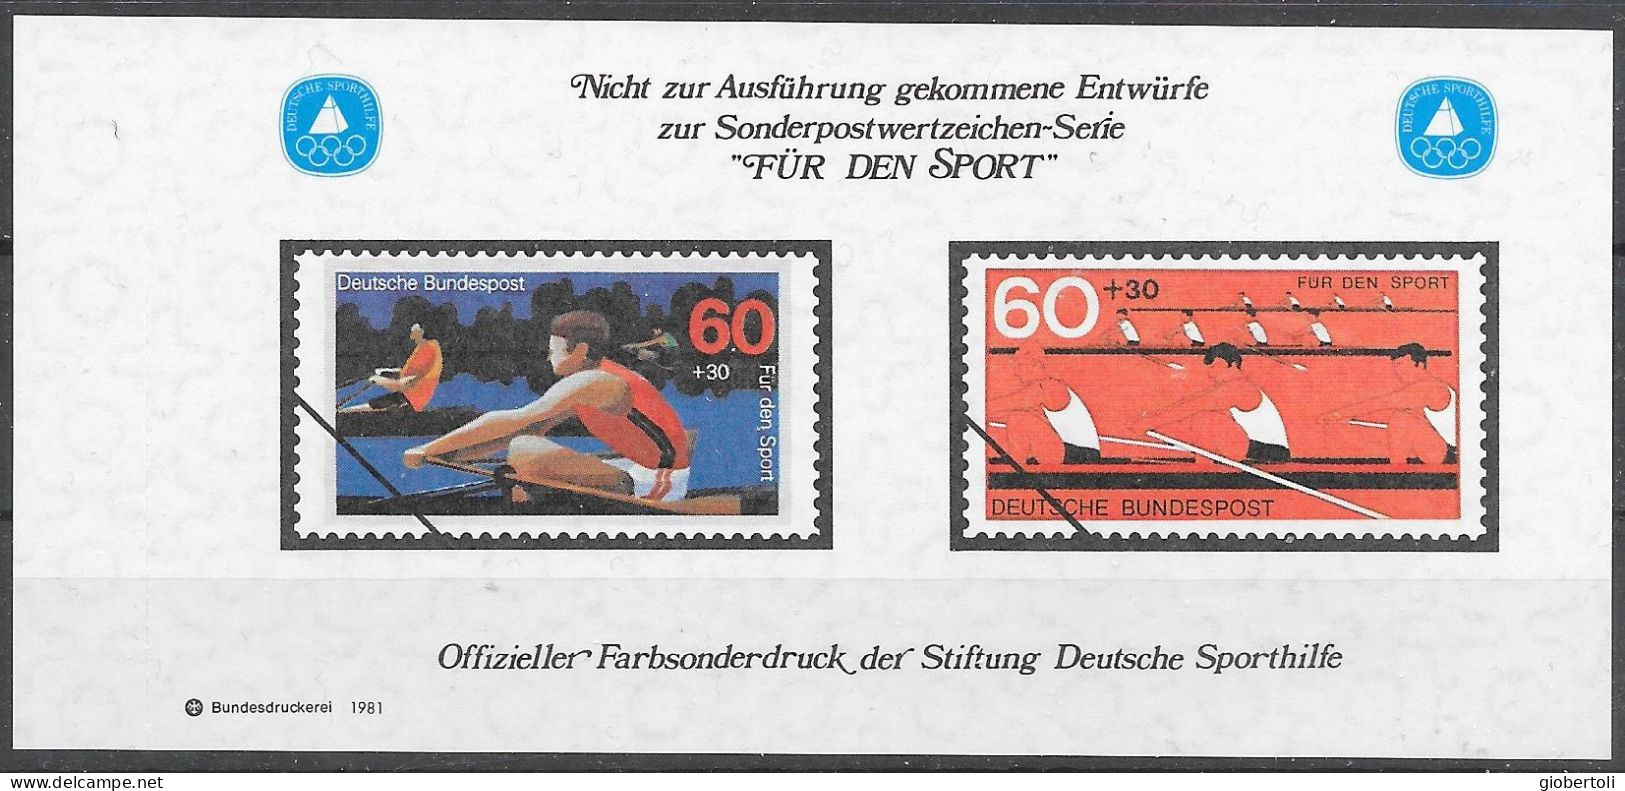 Germania/Germany/Allemagne: Bozzetti Non Adottati, Sketches Not Adopted, Croquis Non Adoptés, Per Lo Sport, For Sport, - Rowing